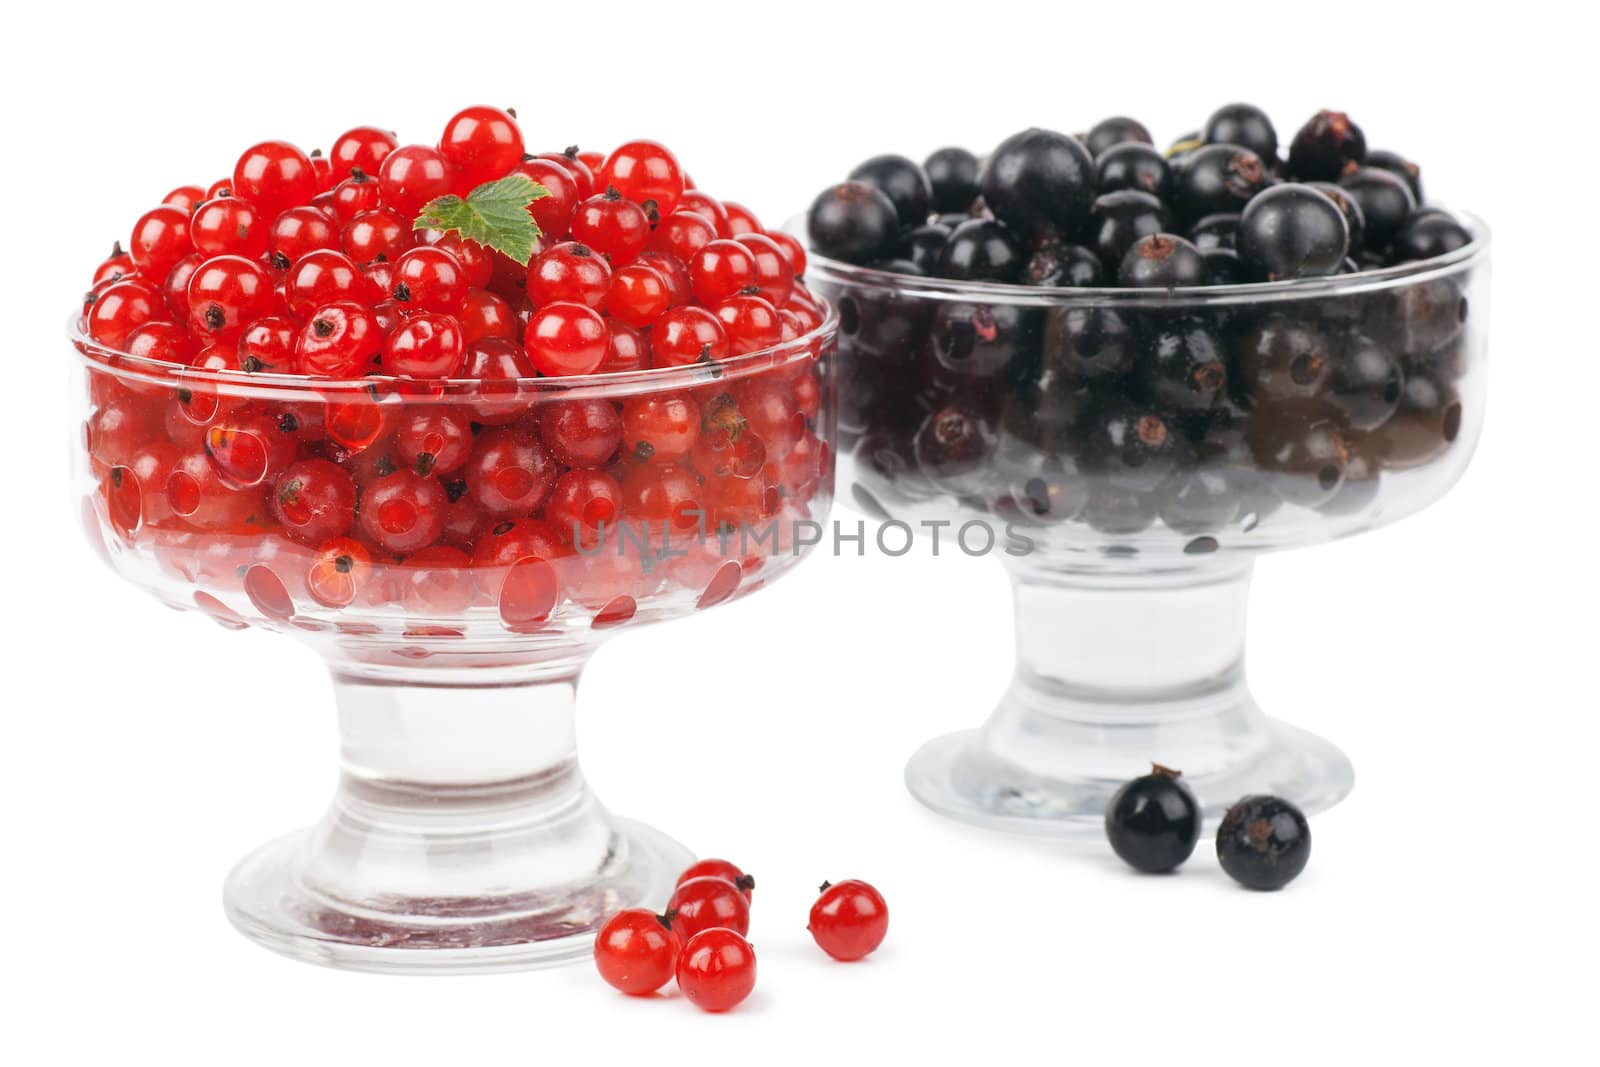 Berries by AGorohov